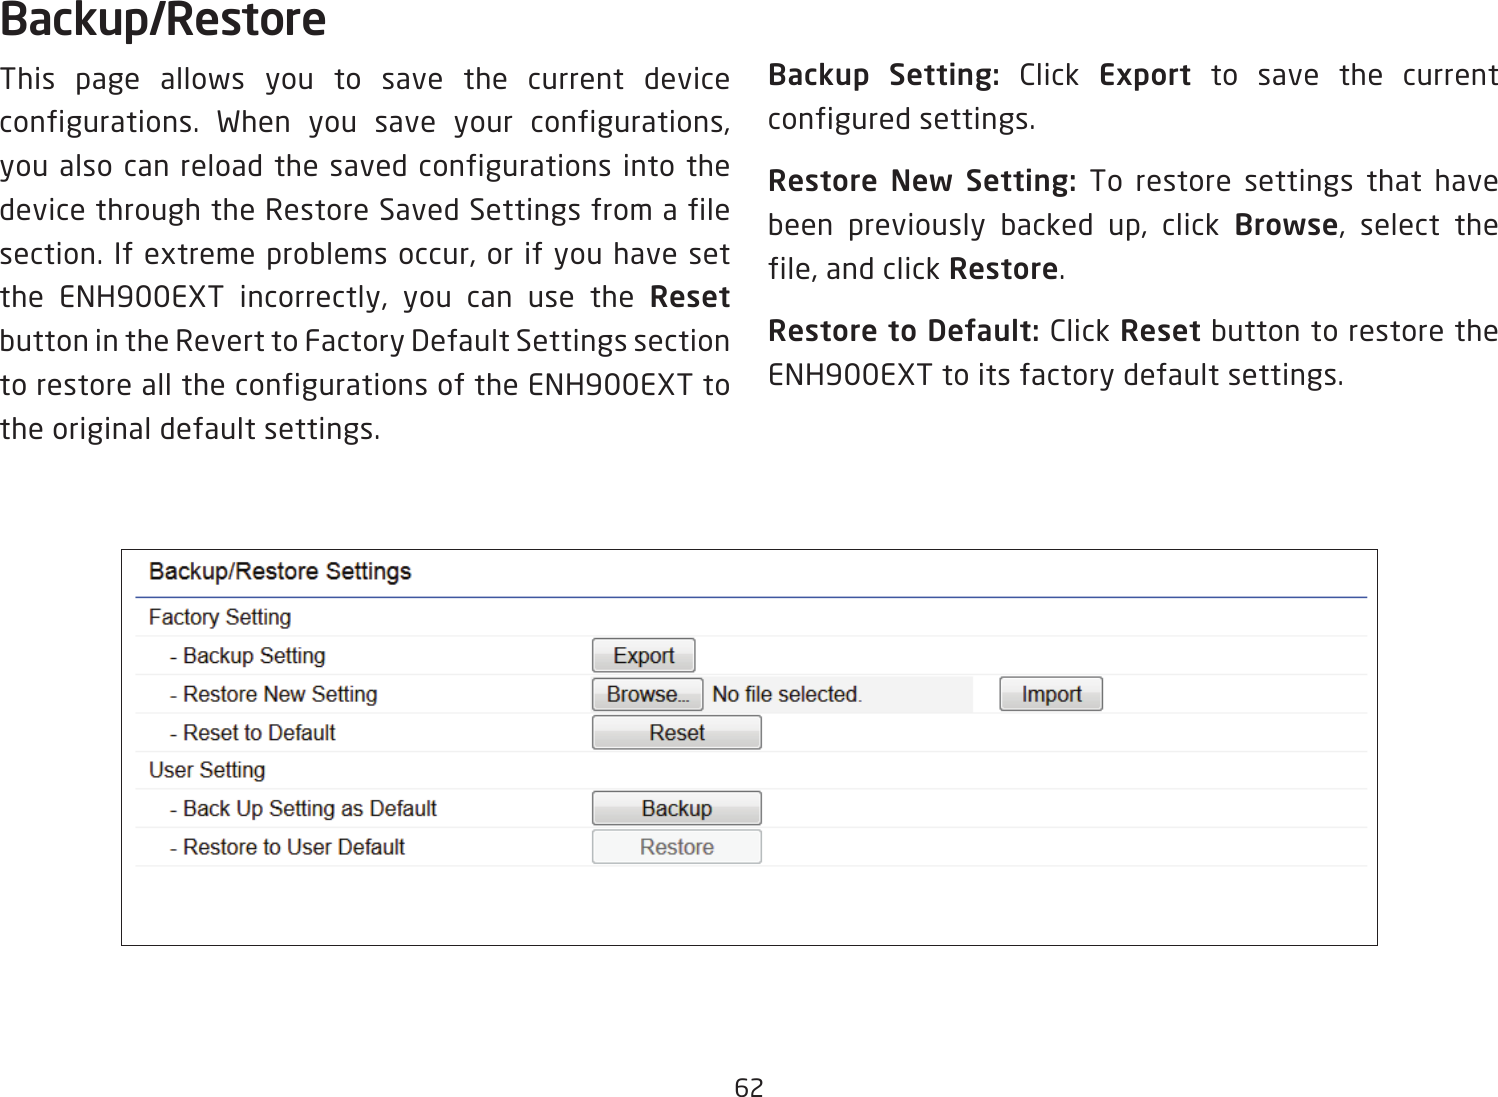 62Backup/RestoreThis page allows you to save the current device configurations. When you save your configurations, you also can reload the saved configurations into the device through the Restore Saved Settings from a file section. If extreme problems occur, or if you have set the ENH900EXT incorrectly, you can use the Reset button in the Revert to Factory Default Settings section to restore all the configurations of the ENH900EXT to the original default settings.Backup Setting: Click Export to save the current configured settings.Restore New Setting: To restore settings that have been previously backed up, click Browse, select the file, and click Restore.Restore to Default: Click Reset button to restore the ENH900EXT to its factory default settings.